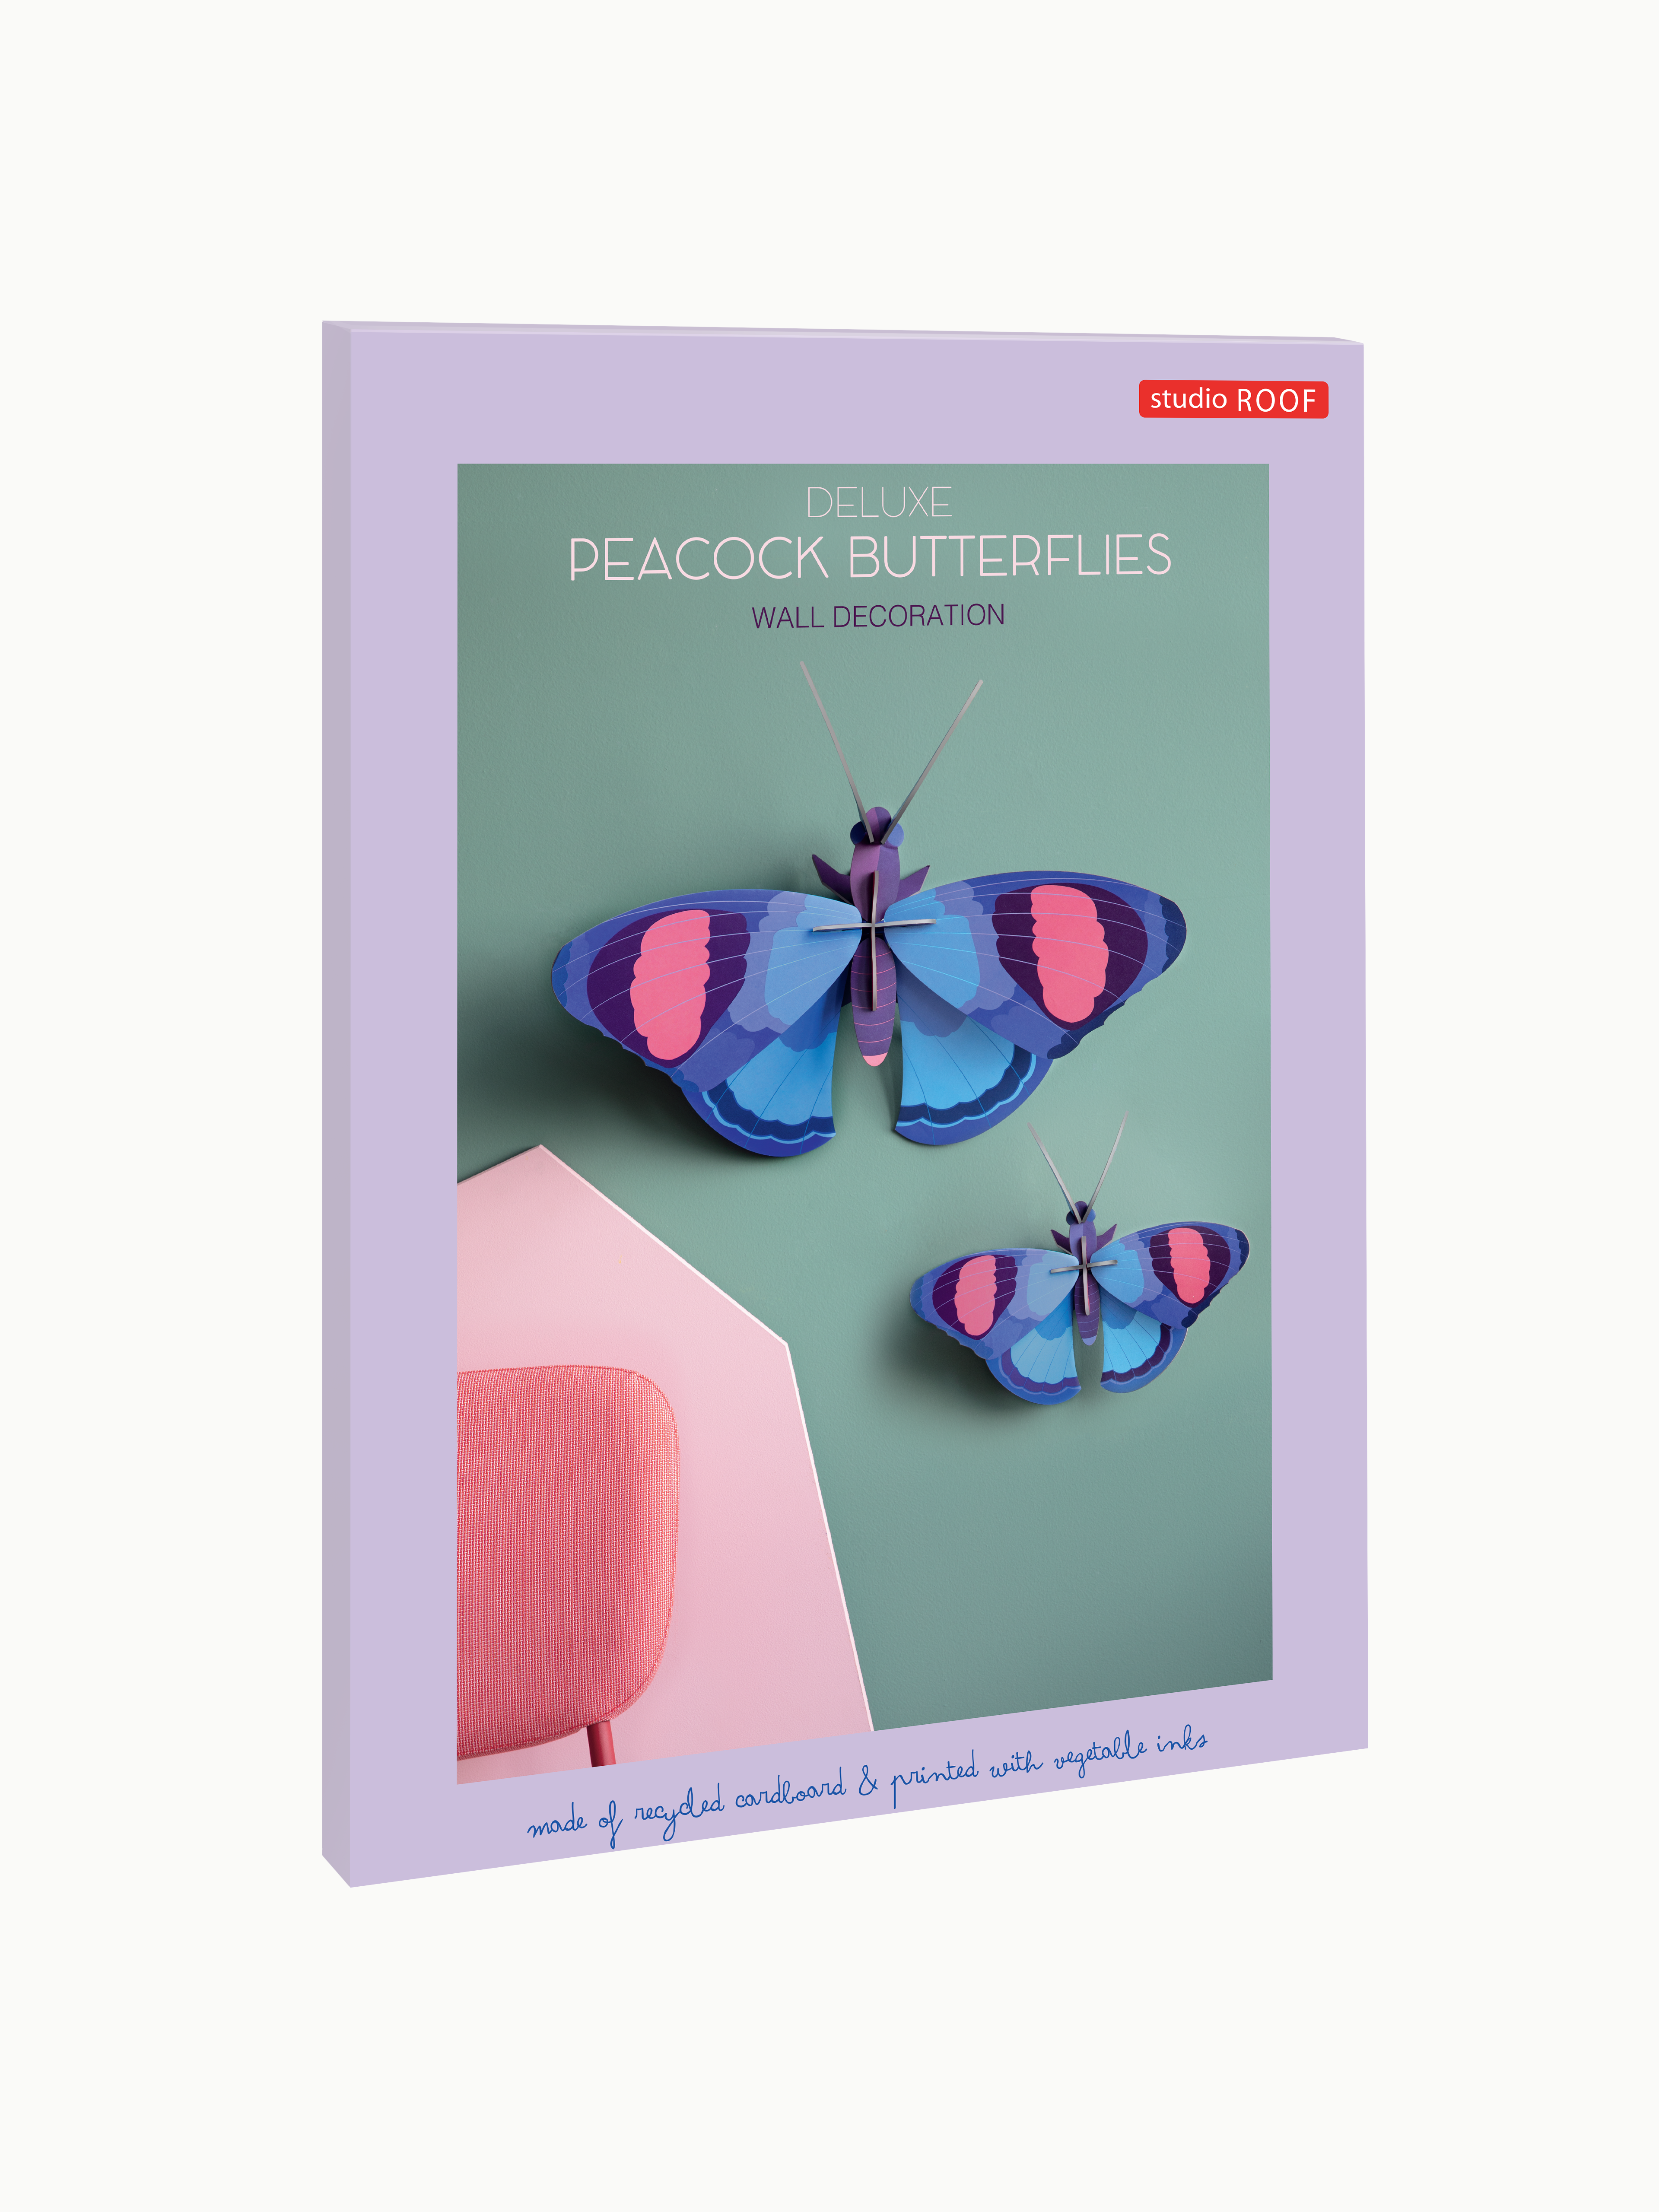 Deluxe Peacock Butterflies Wall Decoration